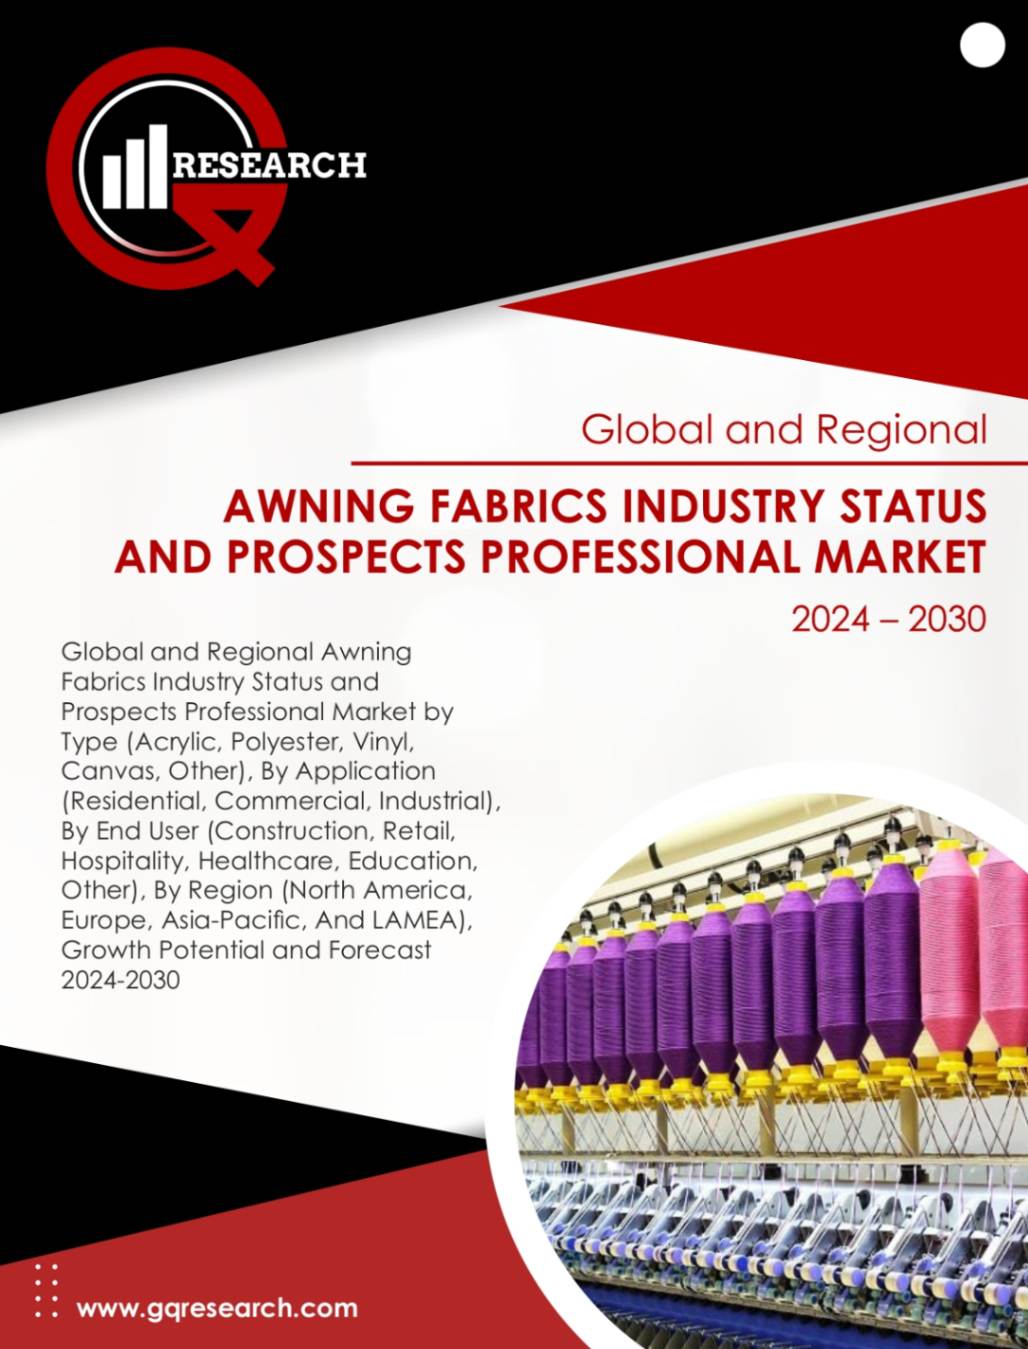 Global and Regional Awning Fabrics Market Growth Analysis by Size, Share & Forecast to 2030 | GQ Research